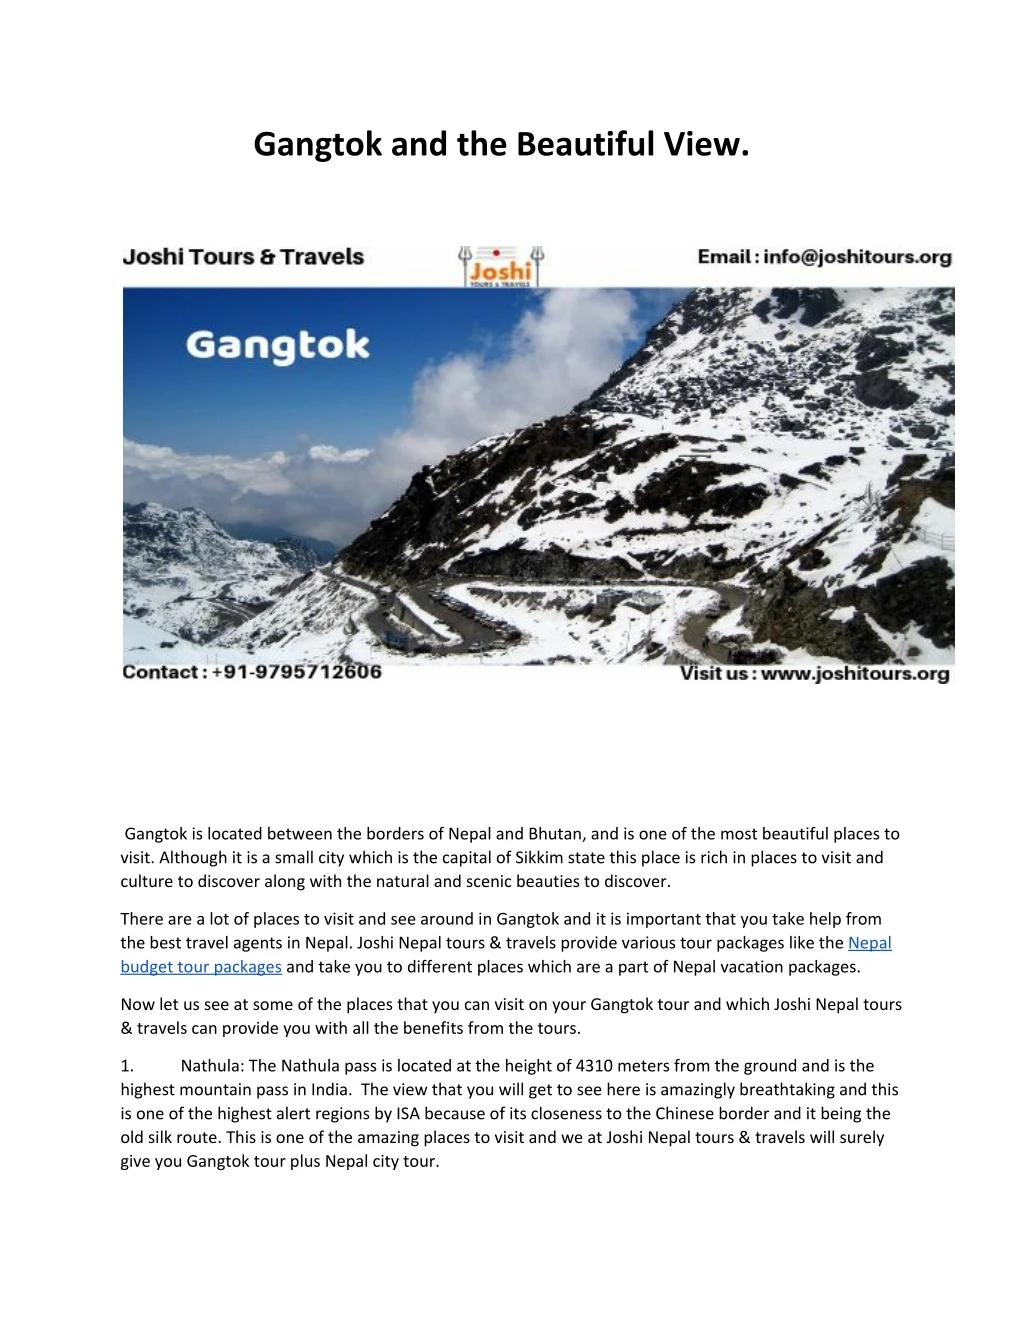 gangtok and the beautiful view